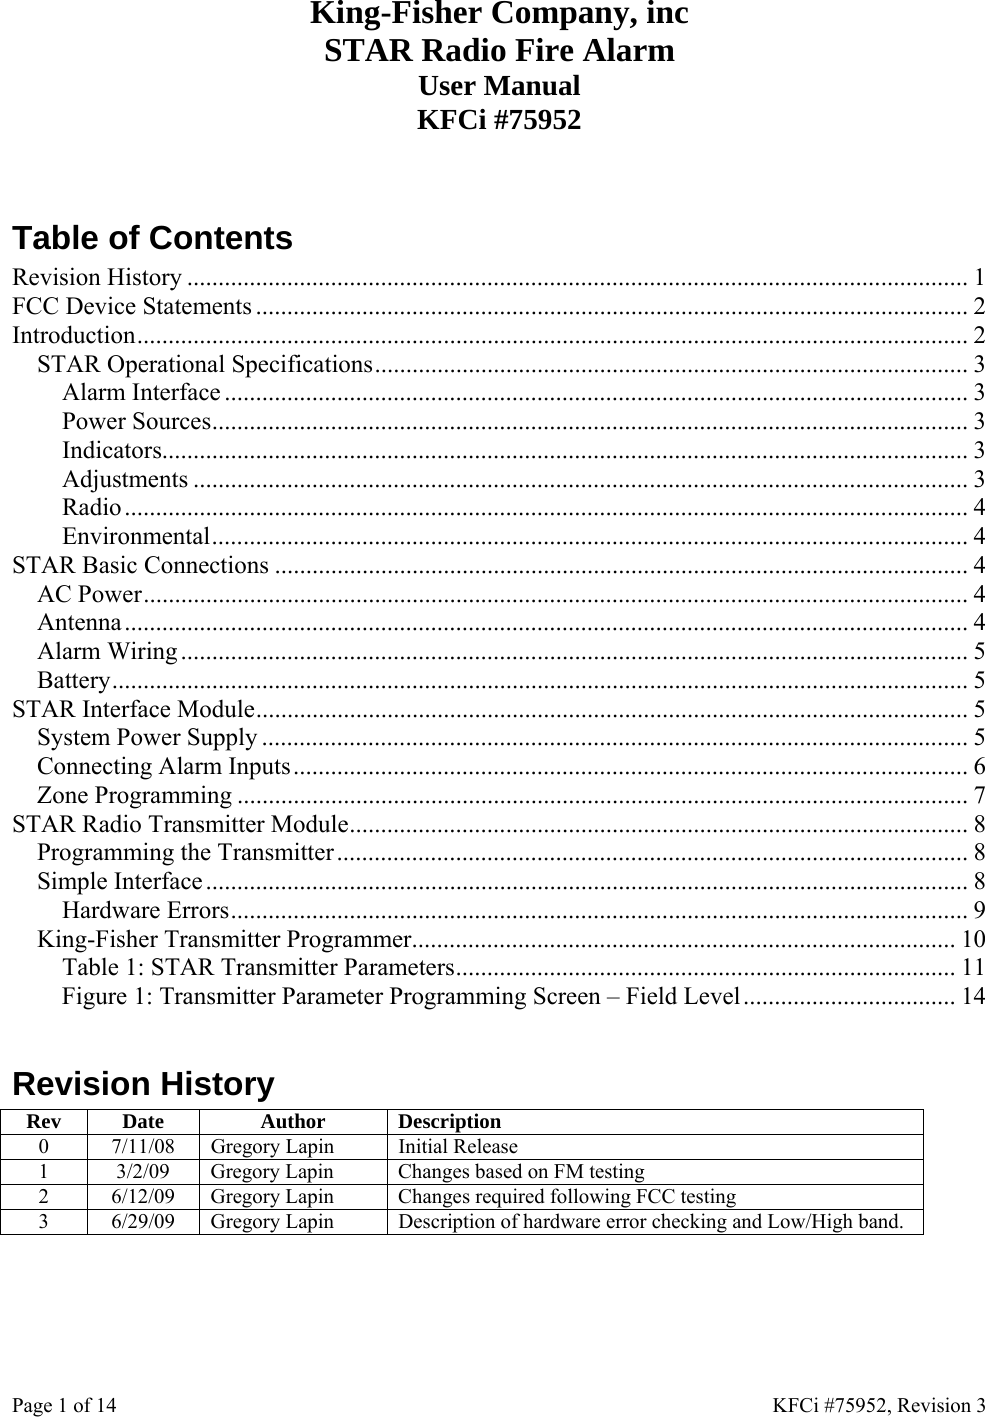 Page 1 of 14    KFCi #75952, Revision 3 King-Fisher Company, inc STAR Radio Fire Alarm User Manual KFCi #75952   Table of Contents Revision History ............................................................................................................................. 1 FCC Device Statements .................................................................................................................. 2 Introduction..................................................................................................................................... 2 STAR Operational Specifications............................................................................................... 3 Alarm Interface ....................................................................................................................... 3 Power Sources......................................................................................................................... 3 Indicators................................................................................................................................. 3 Adjustments ............................................................................................................................ 3 Radio....................................................................................................................................... 4 Environmental......................................................................................................................... 4 STAR Basic Connections ............................................................................................................... 4 AC Power.................................................................................................................................... 4 Antenna....................................................................................................................................... 4 Alarm Wiring.............................................................................................................................. 5 Battery......................................................................................................................................... 5 STAR Interface Module.................................................................................................................. 5 System Power Supply ................................................................................................................. 5 Connecting Alarm Inputs............................................................................................................ 6 Zone Programming ..................................................................................................................... 7 STAR Radio Transmitter Module...................................................................................................8 Programming the Transmitter.....................................................................................................8 Simple Interface.......................................................................................................................... 8 Hardware Errors...................................................................................................................... 9 King-Fisher Transmitter Programmer....................................................................................... 10 Table 1: STAR Transmitter Parameters................................................................................ 11 Figure 1: Transmitter Parameter Programming Screen – Field Level.................................. 14  Revision History Rev Date  Author  Description 0  7/11/08  Gregory Lapin  Initial Release 1  3/2/09  Gregory Lapin  Changes based on FM testing 2  6/12/09  Gregory Lapin  Changes required following FCC testing 3  6/29/09  Gregory Lapin  Description of hardware error checking and Low/High band.  